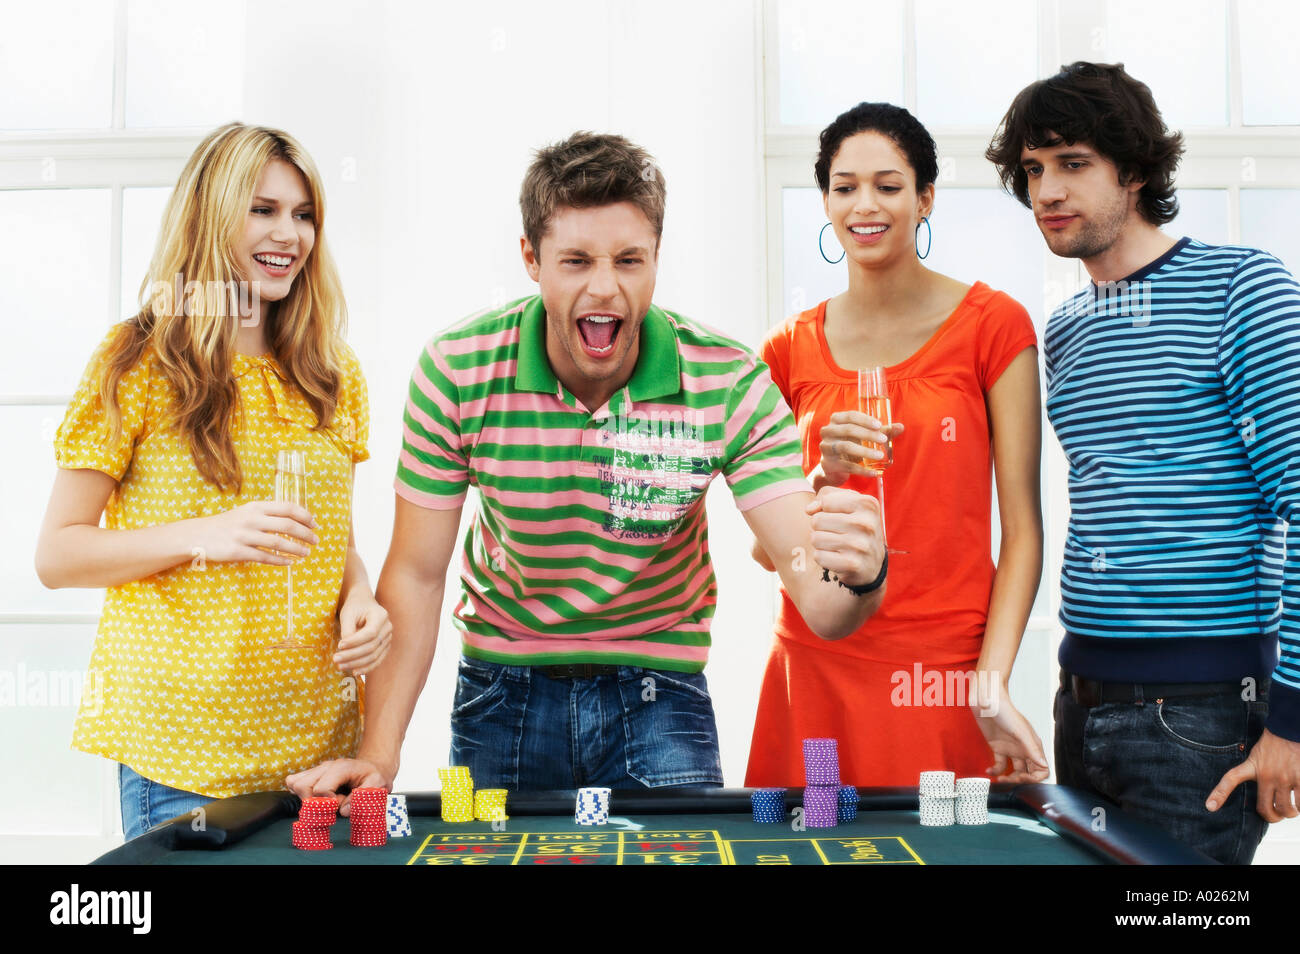 Young man with friends celebrating gambling win at roulette table Stock Photo